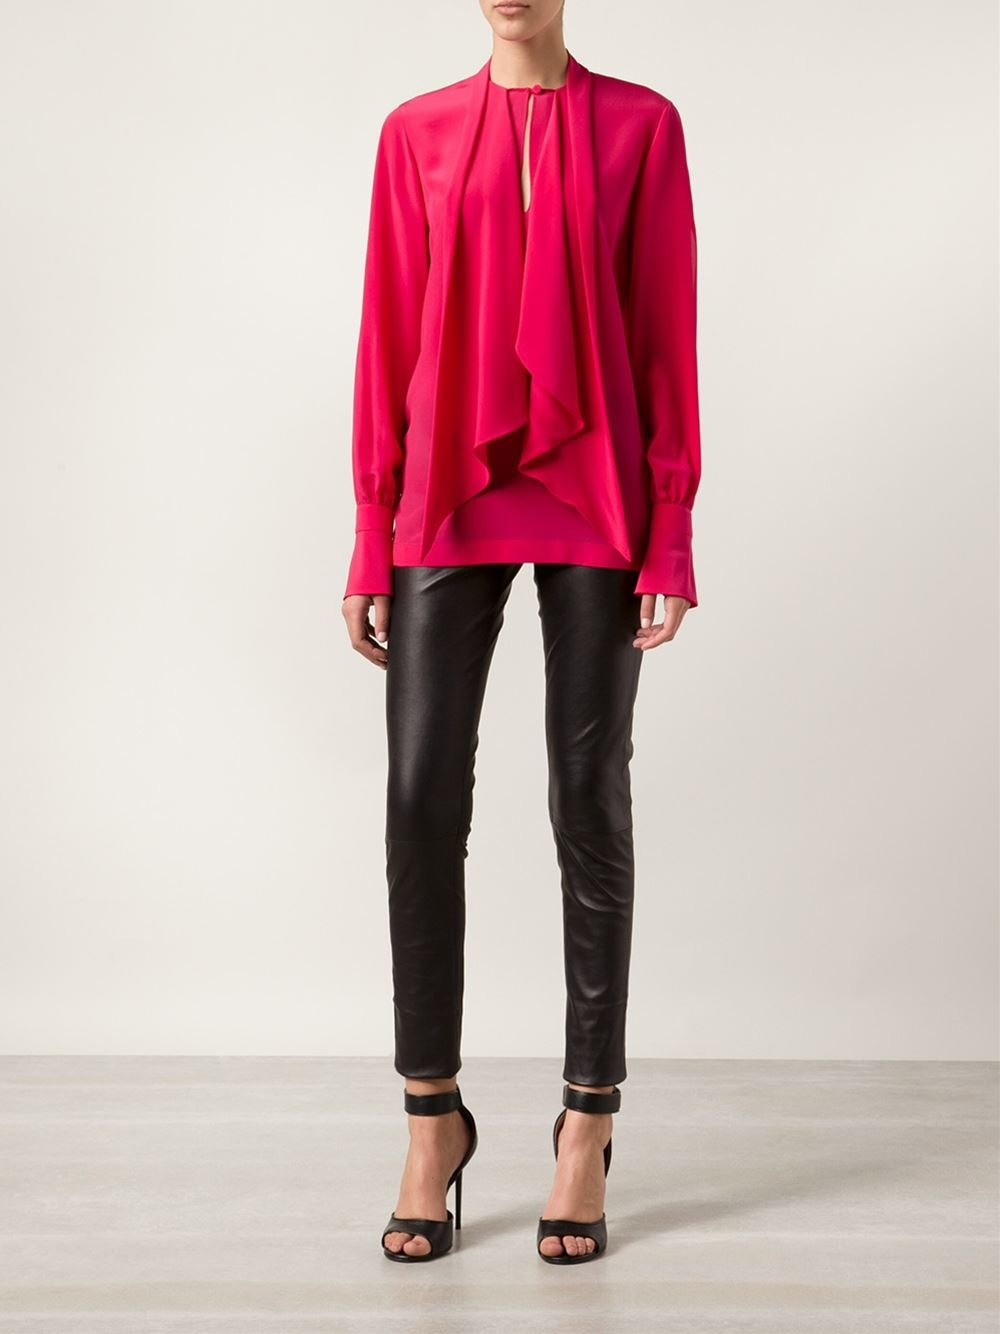 Givenchy Silk Chiffon Tie Neck Blouse in Pink | Lyst